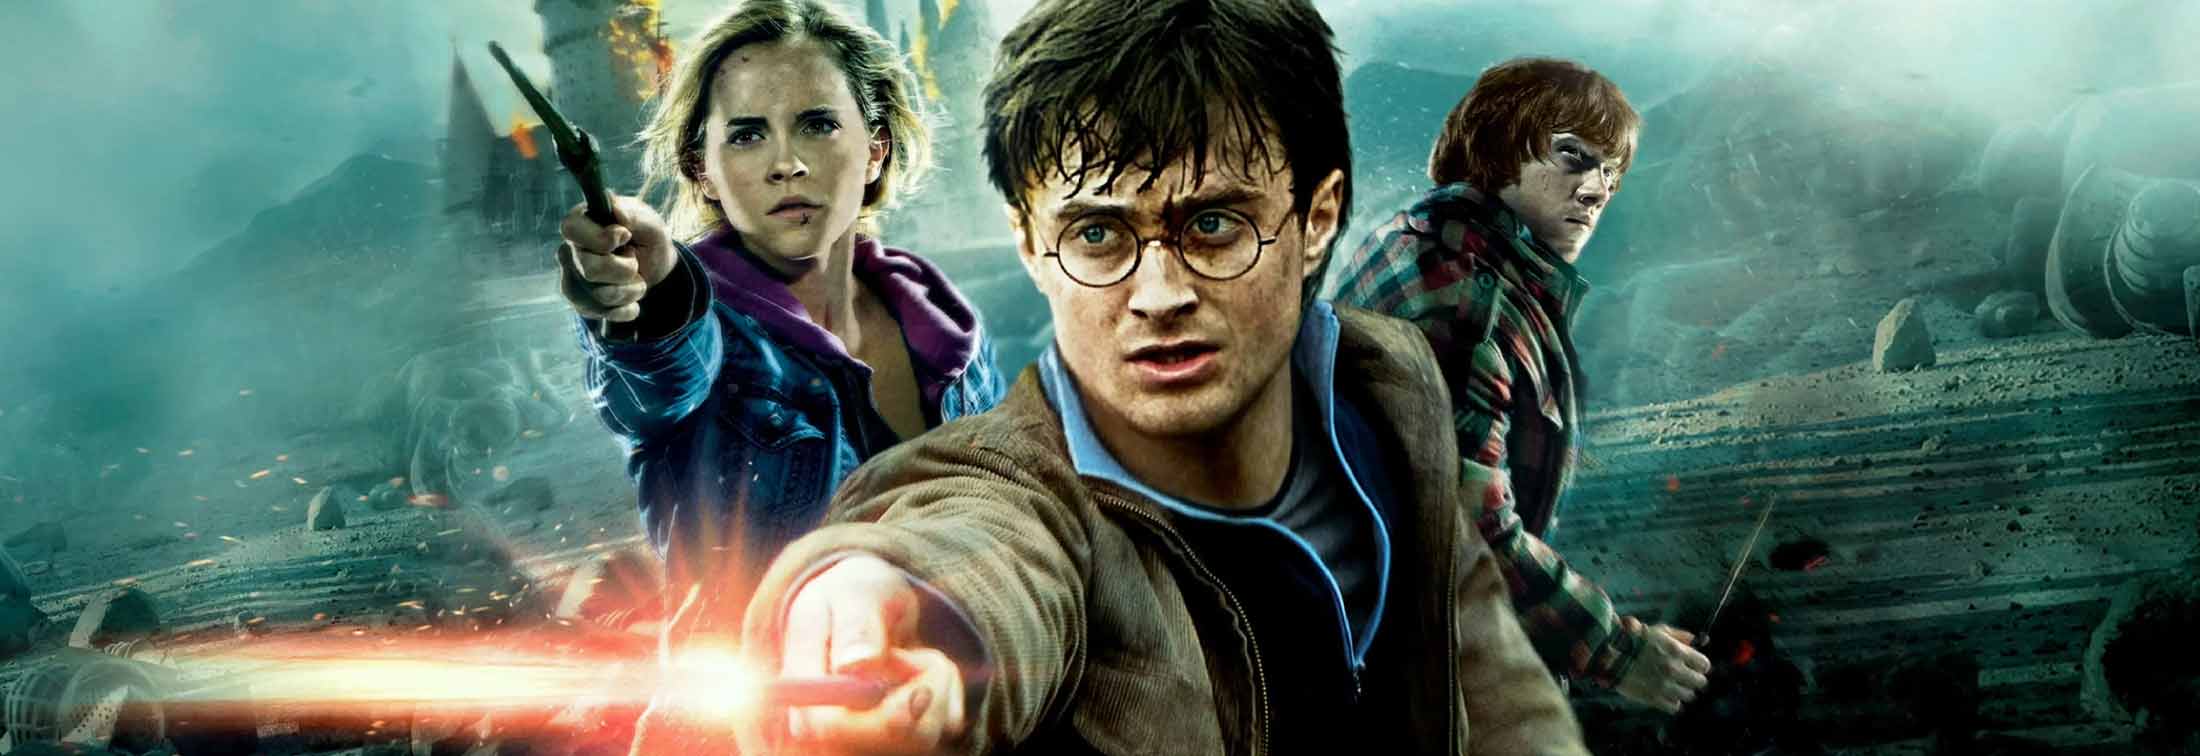 Harry Potter and the Deathly Hallows: Part 2 Review: 10 years since the boy  who lived came to die | Retrospective Review | SWITCH.